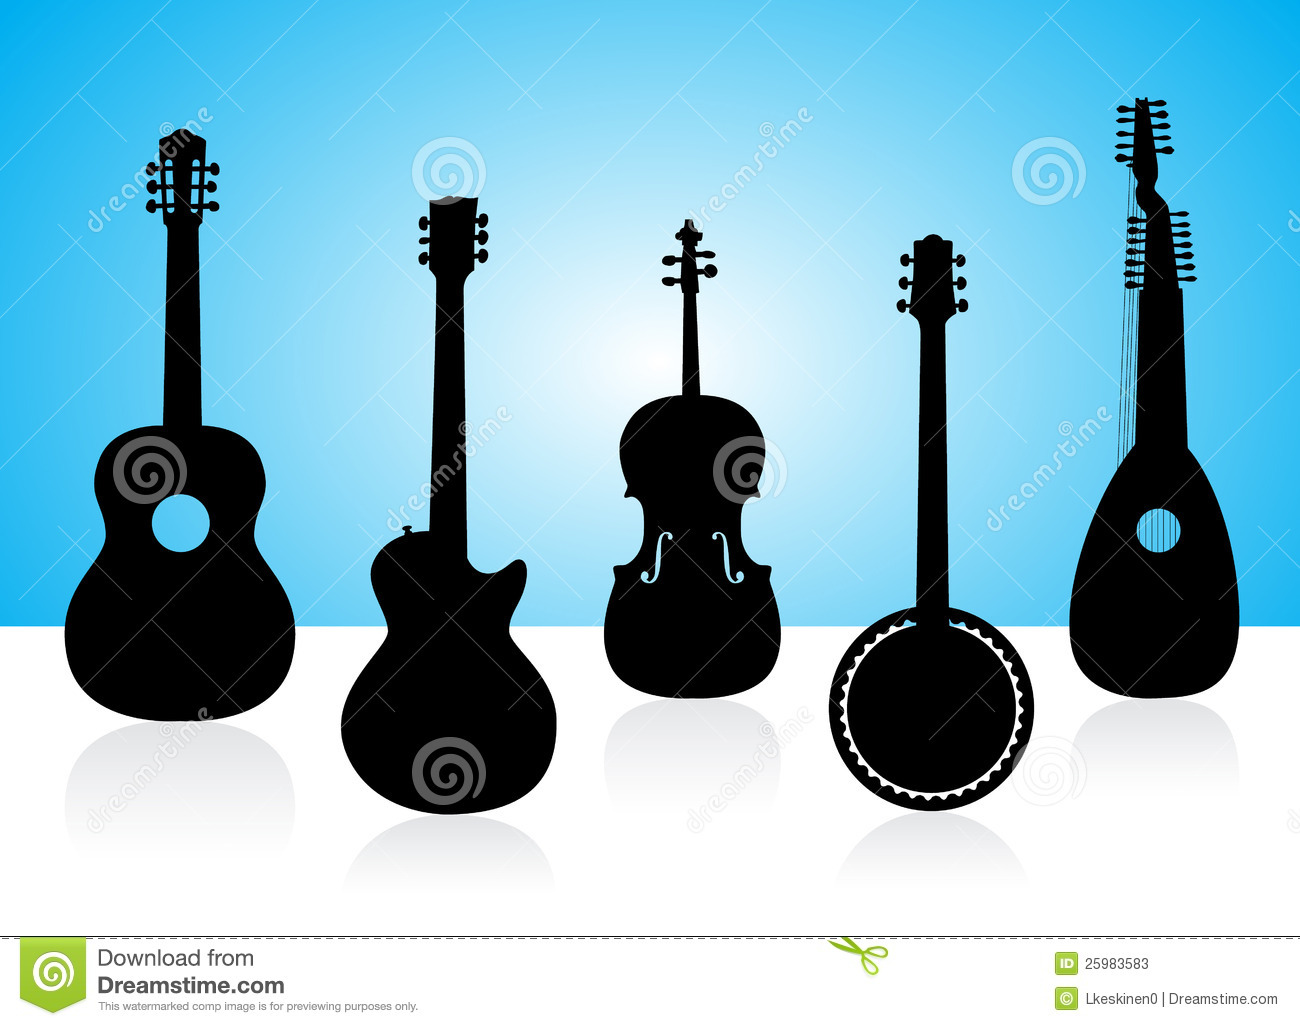 String Instruments Silhouettes Stock Photos   Image  25983583